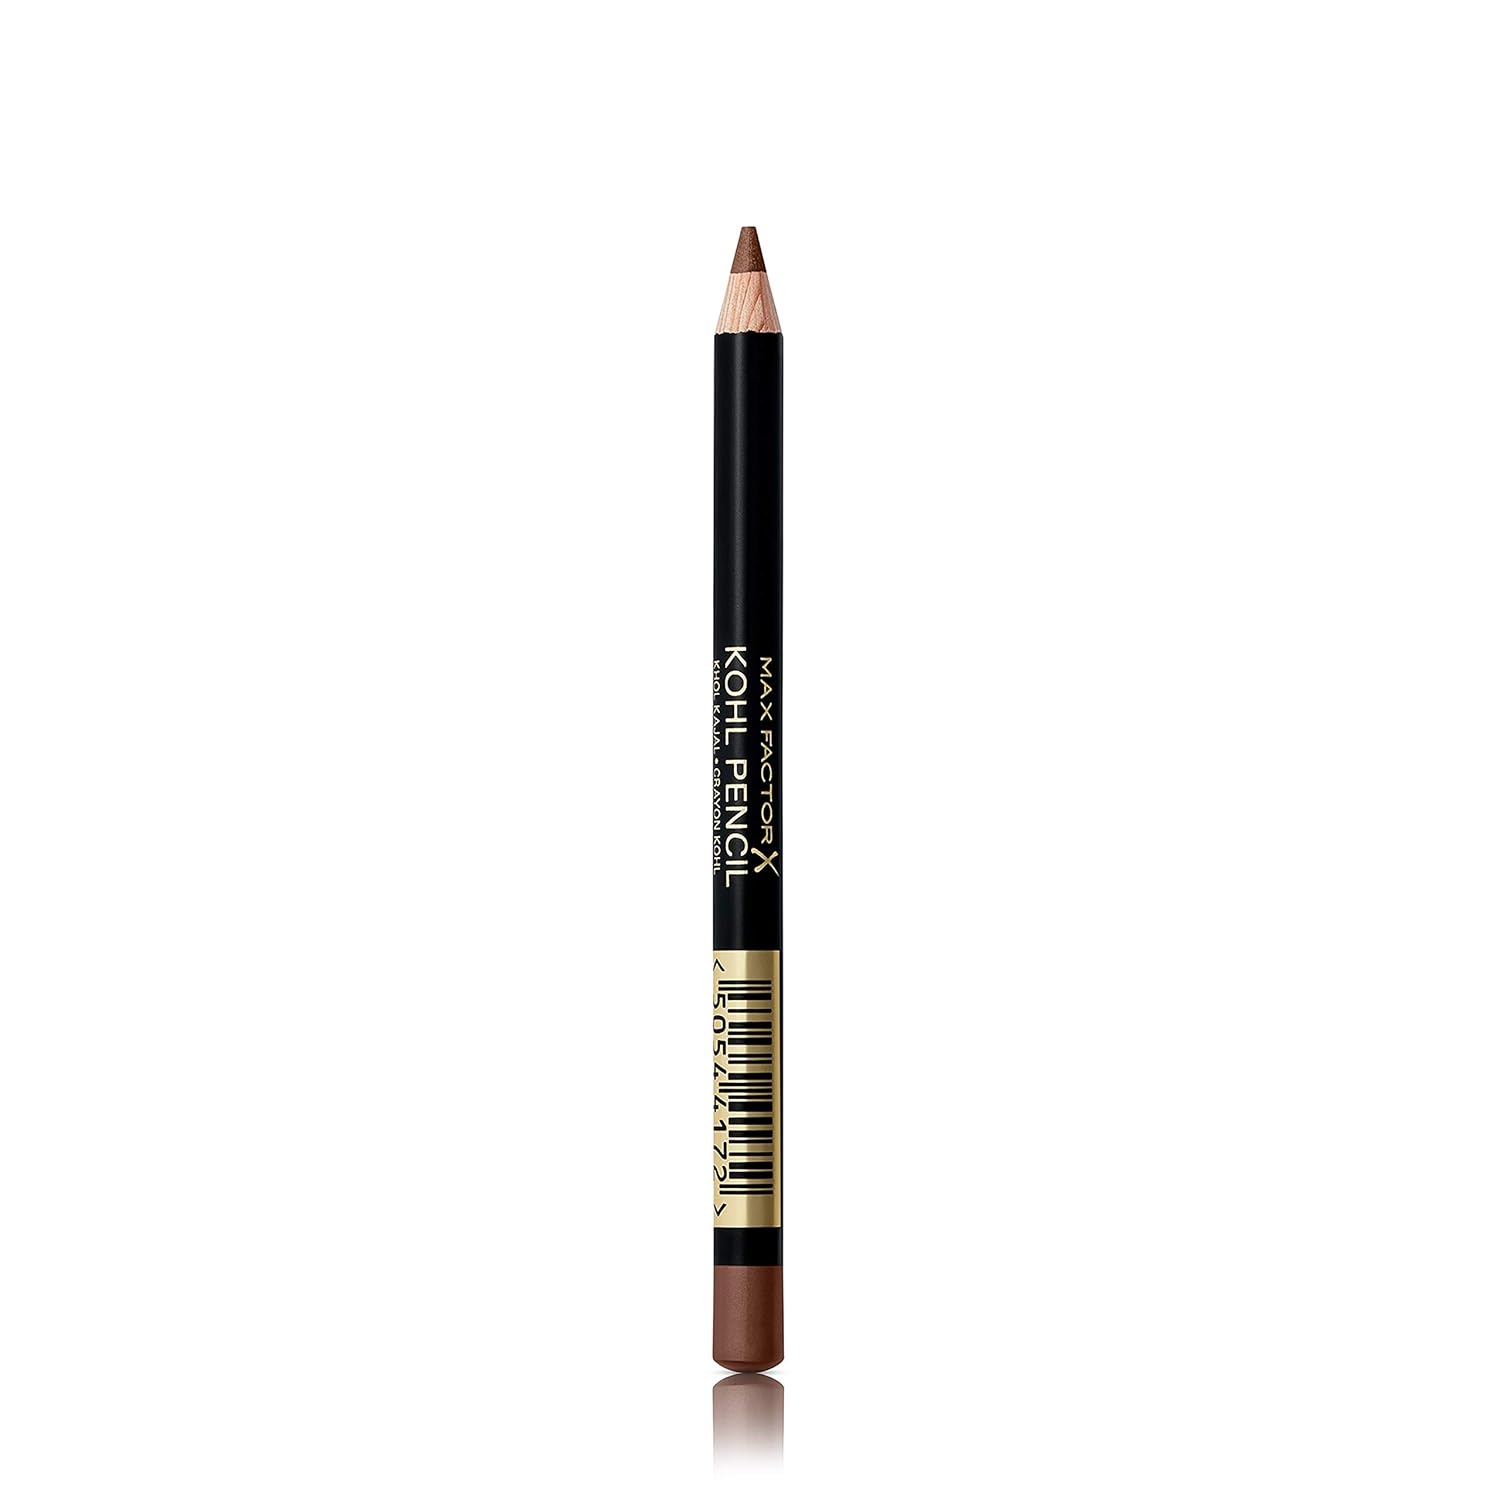 Max Factor Kohl Pencil Eyeliner - 040 Taupe for Women, 0.1